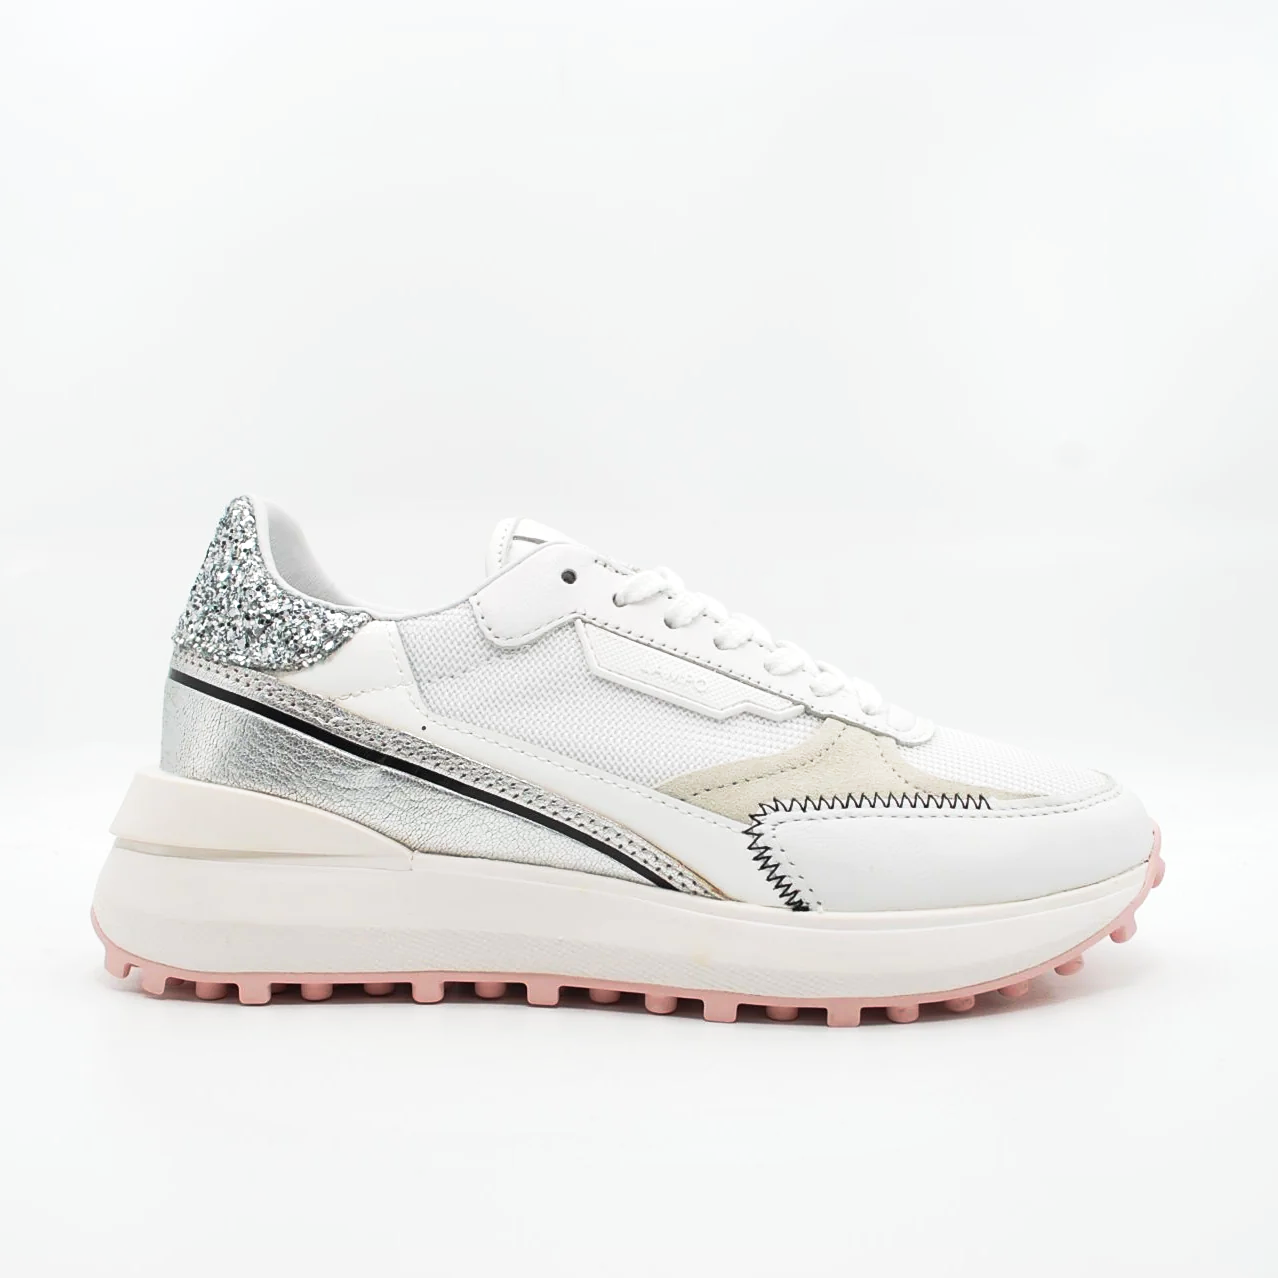 sneakers-d-a-t-e-lampo-dragon-35-bianco-pelle-sneakers.png